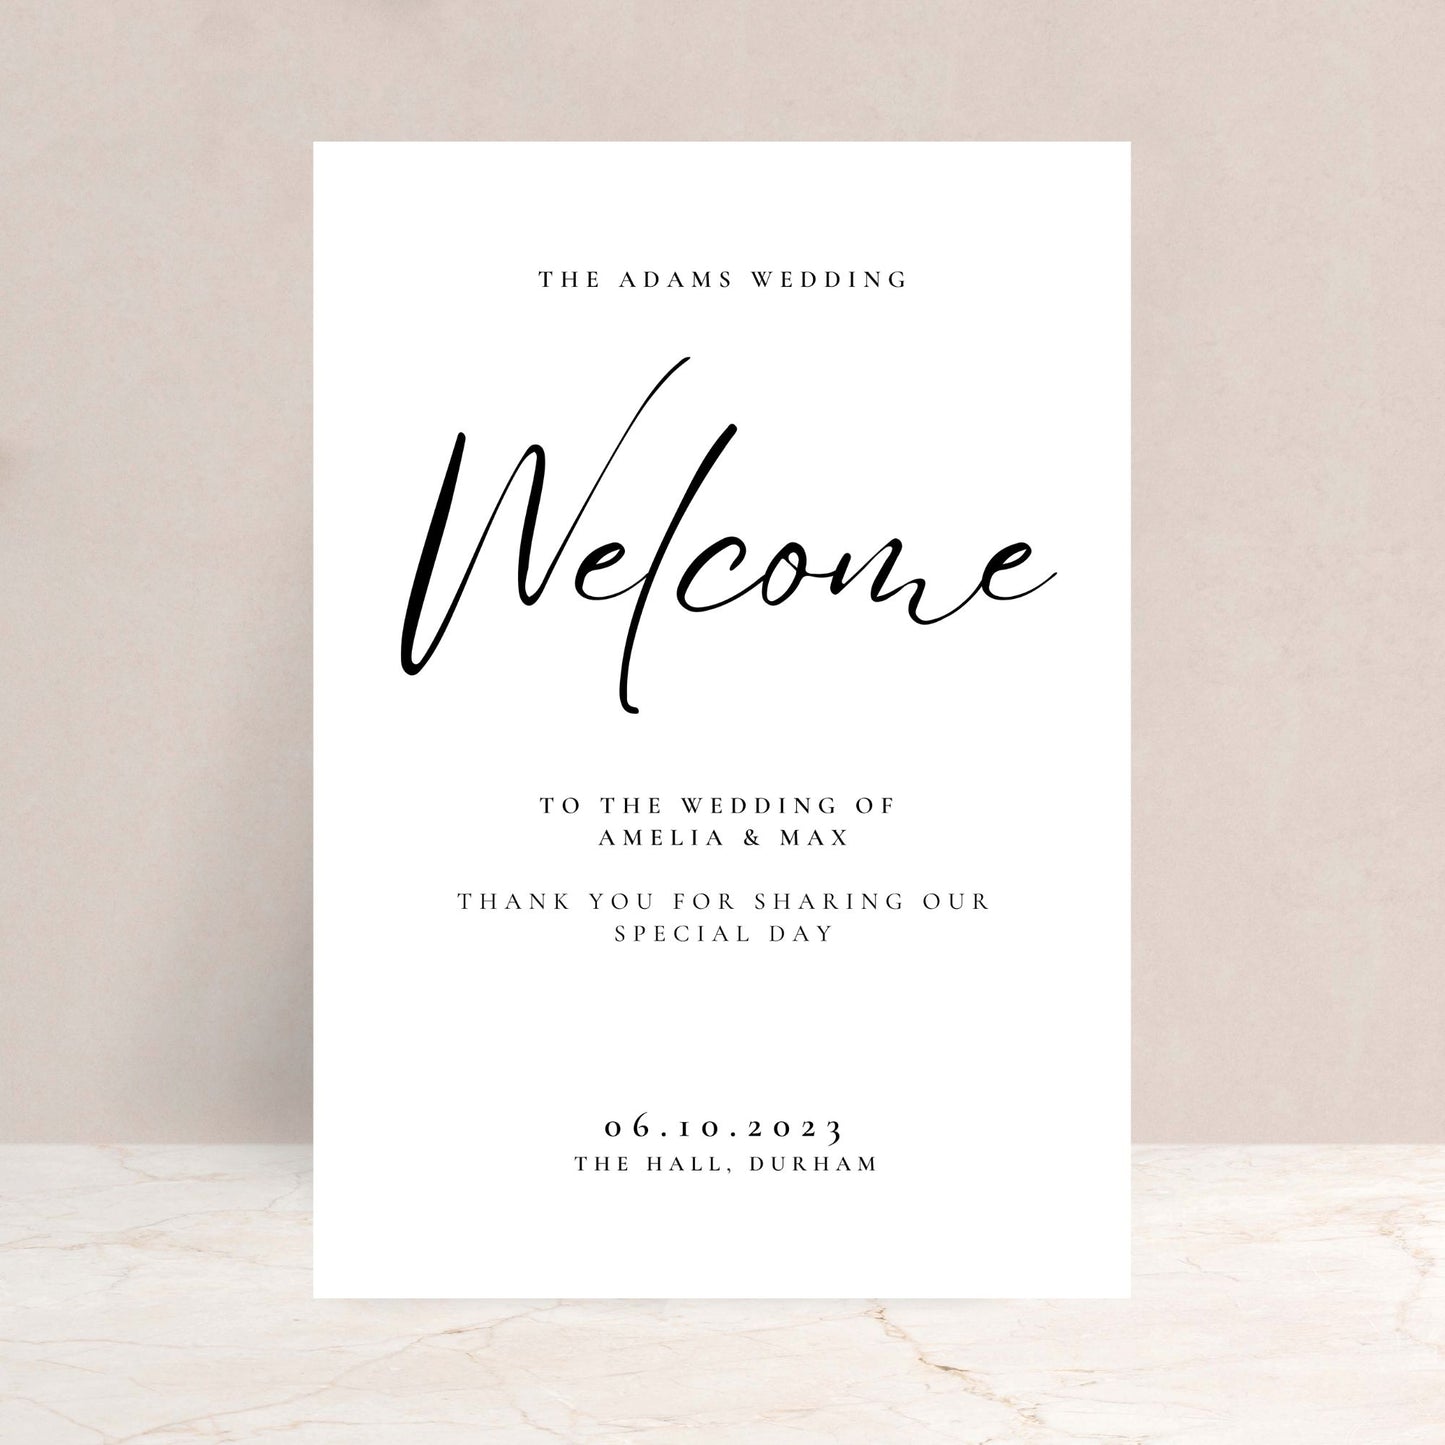 AMELIA Wedding Welcome Sign - Wedding Ceremony Stationery available at The Ivy Collection | Luxury Wedding Stationery